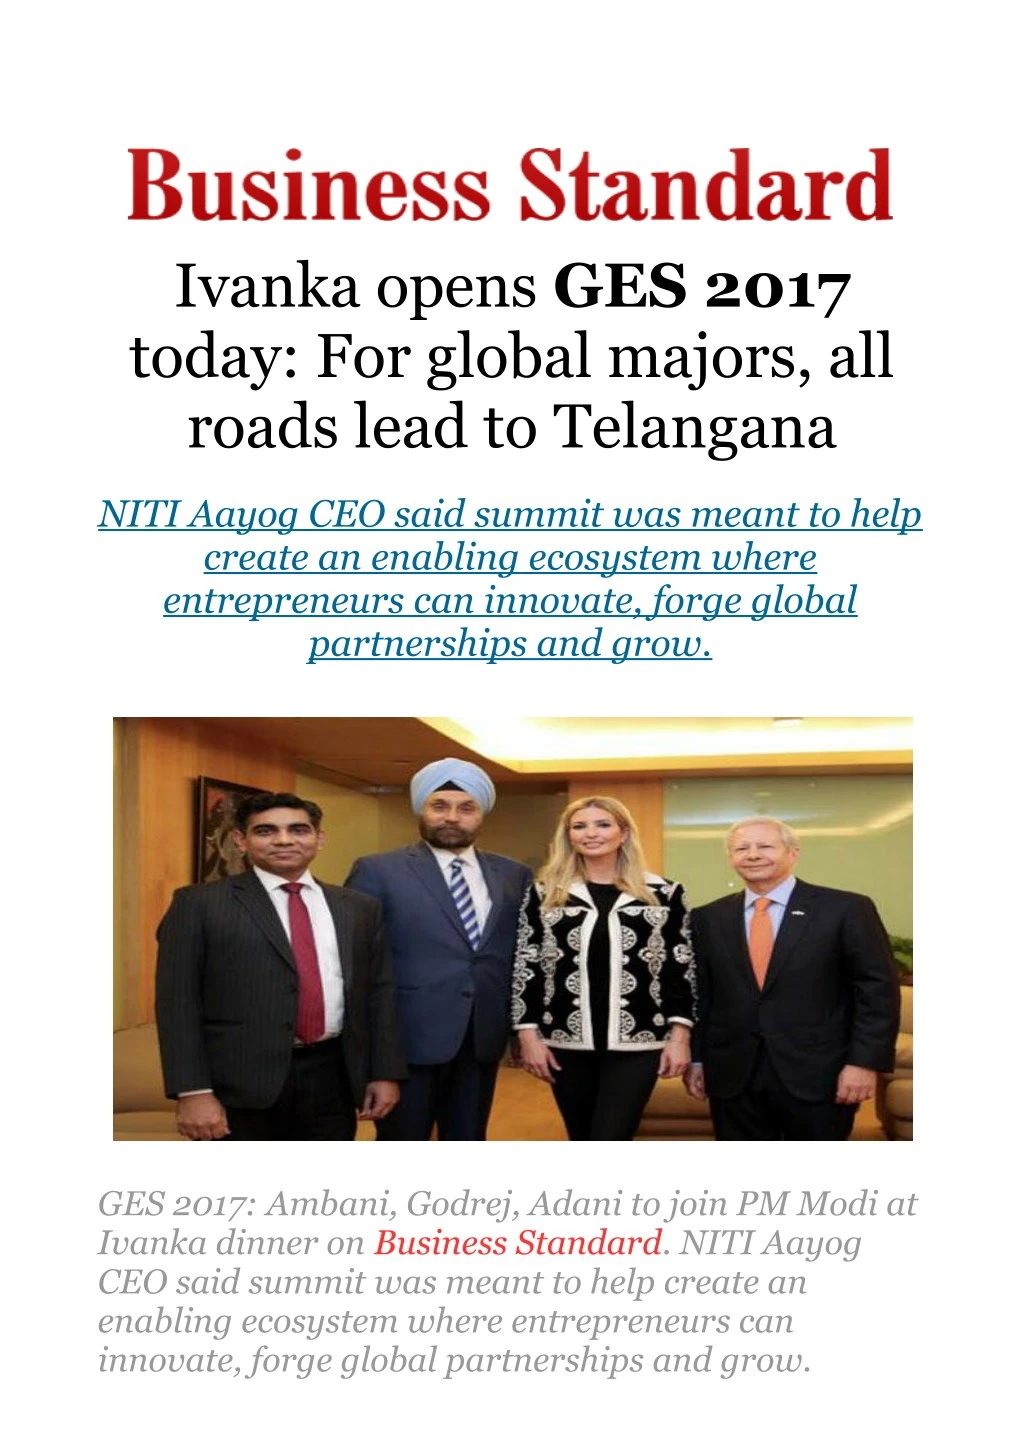 ivanka opens ges 2017 today for global majors